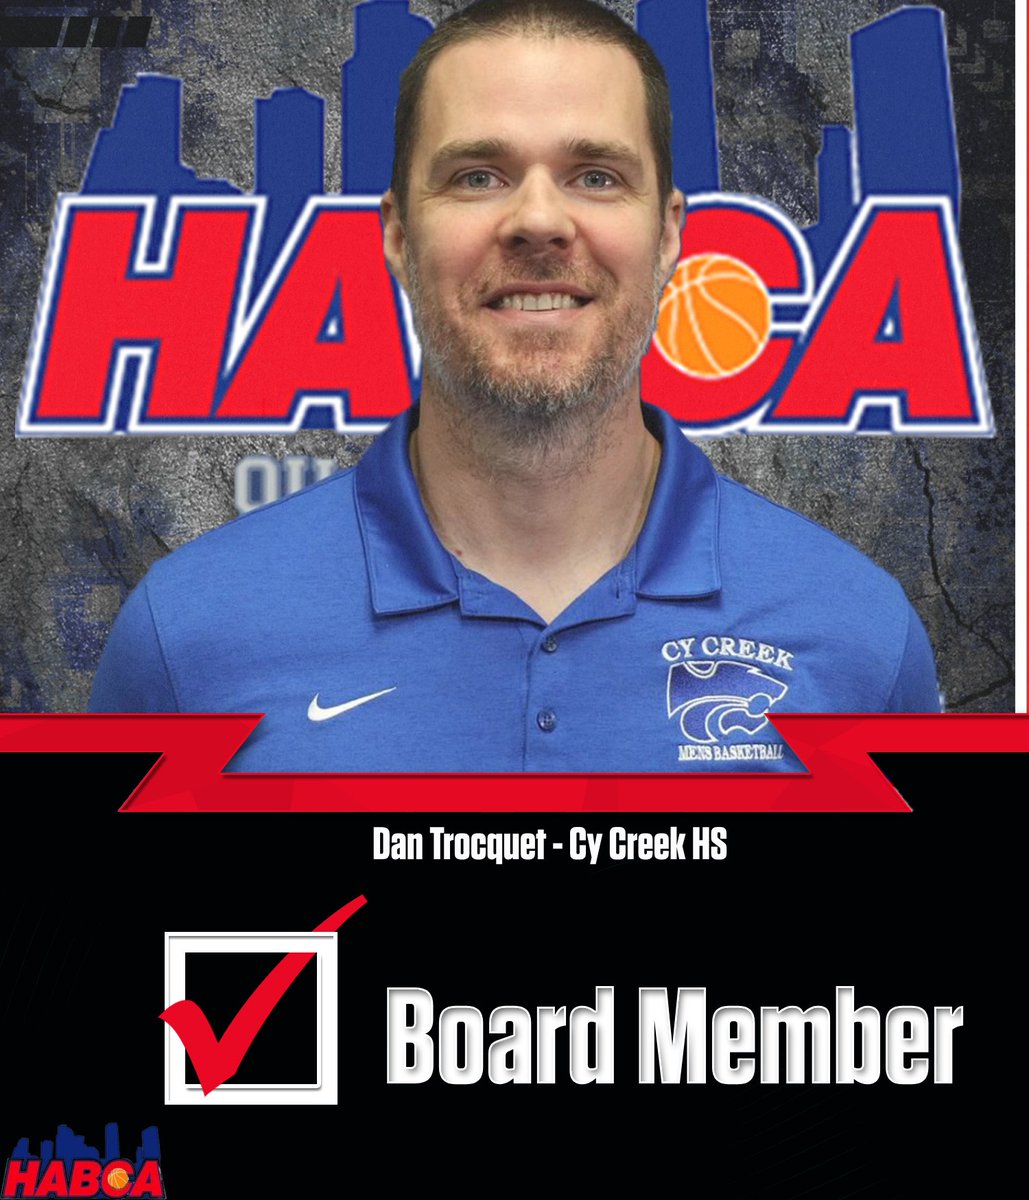 🔴🔵Welcome to the newest member of the HABCA Board❗️❗️